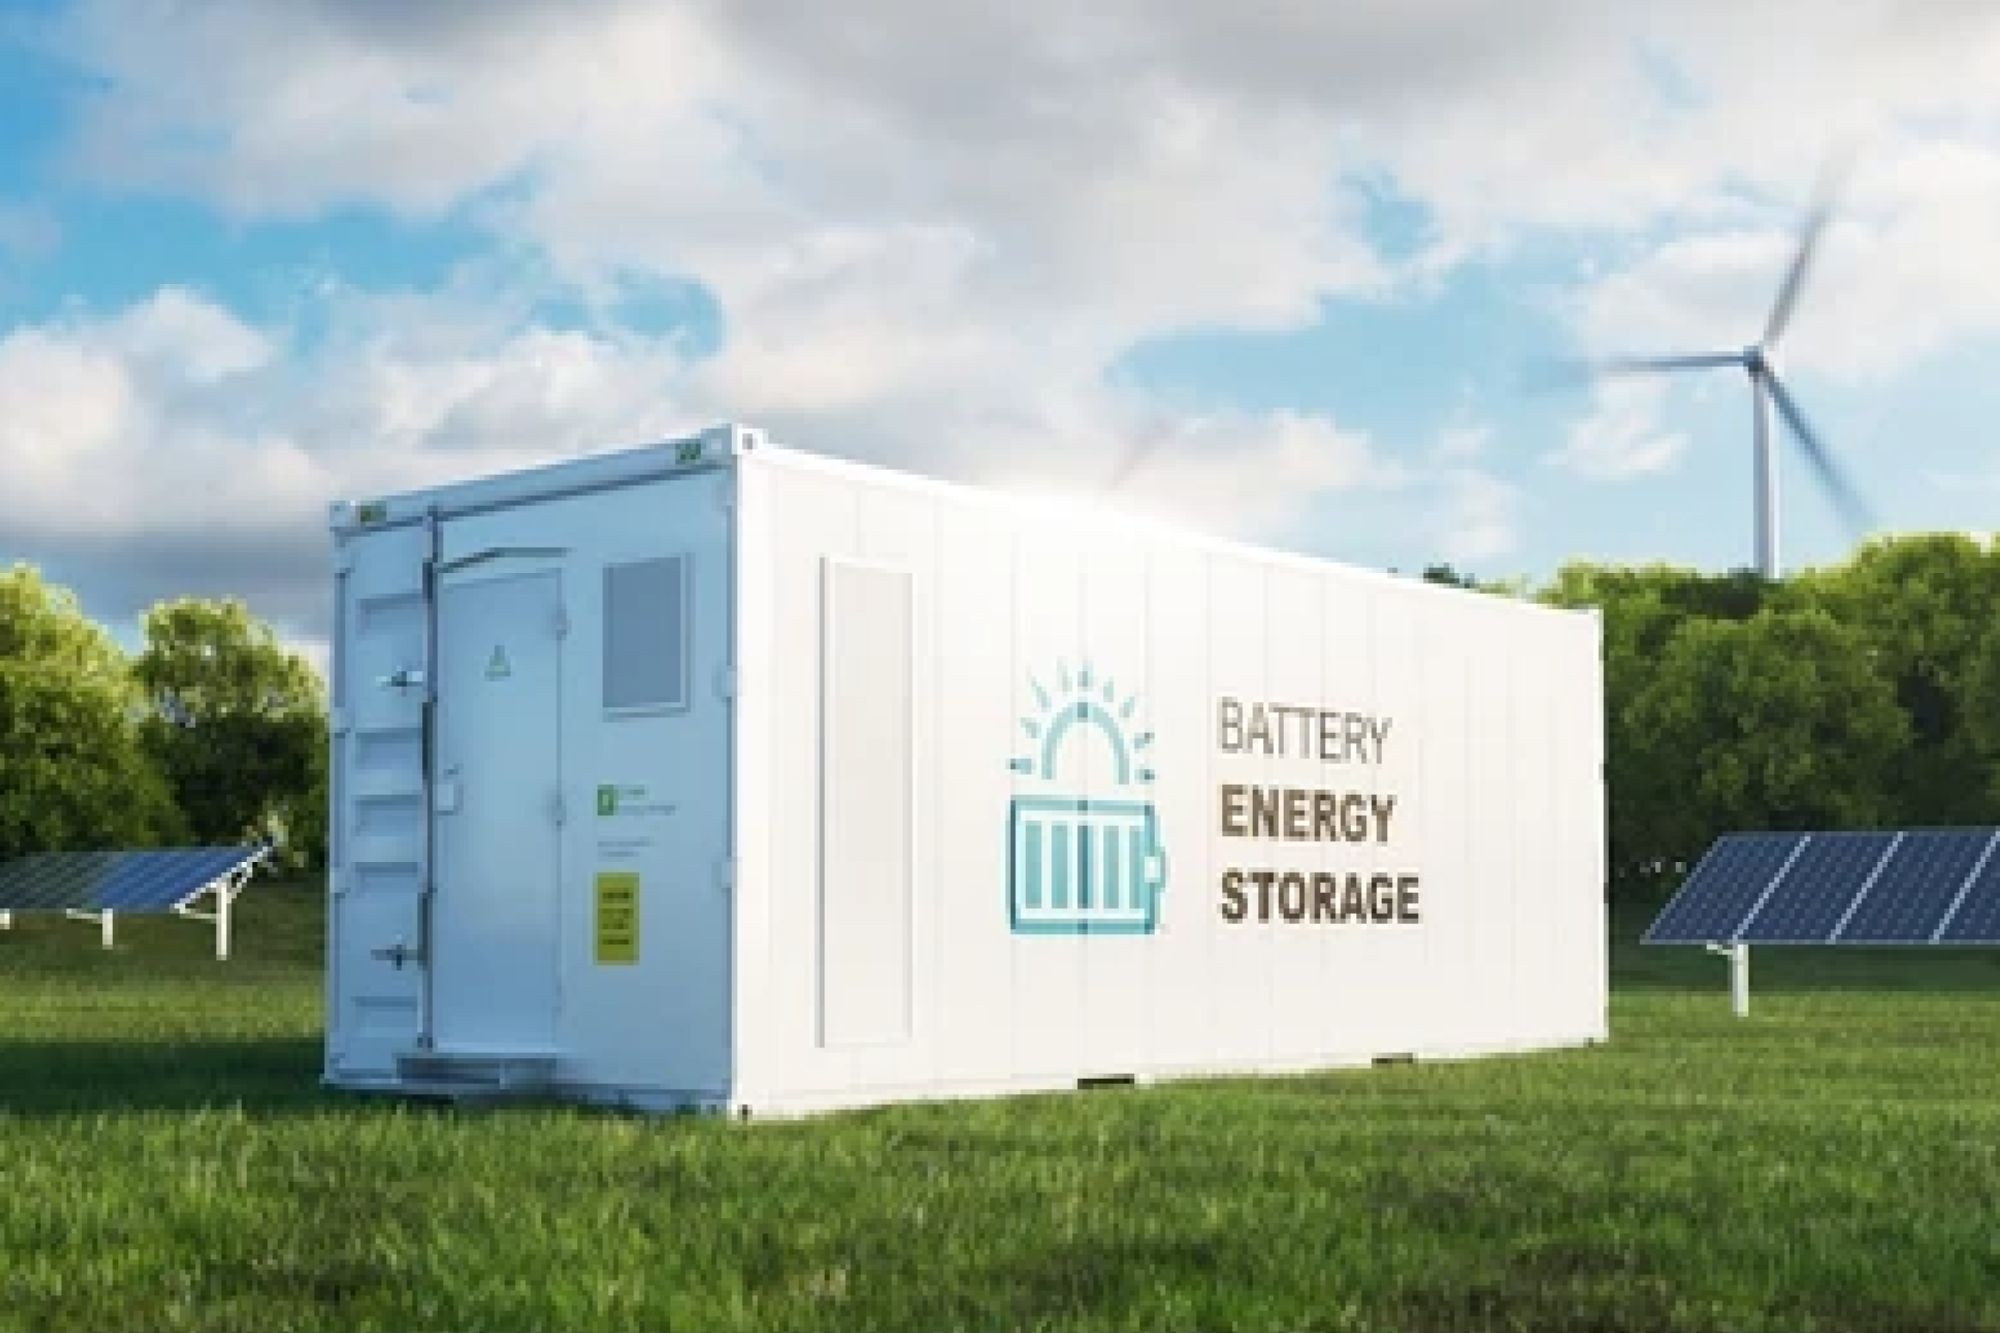 IndiGrid secures 180MW battery storage project in Gujarat